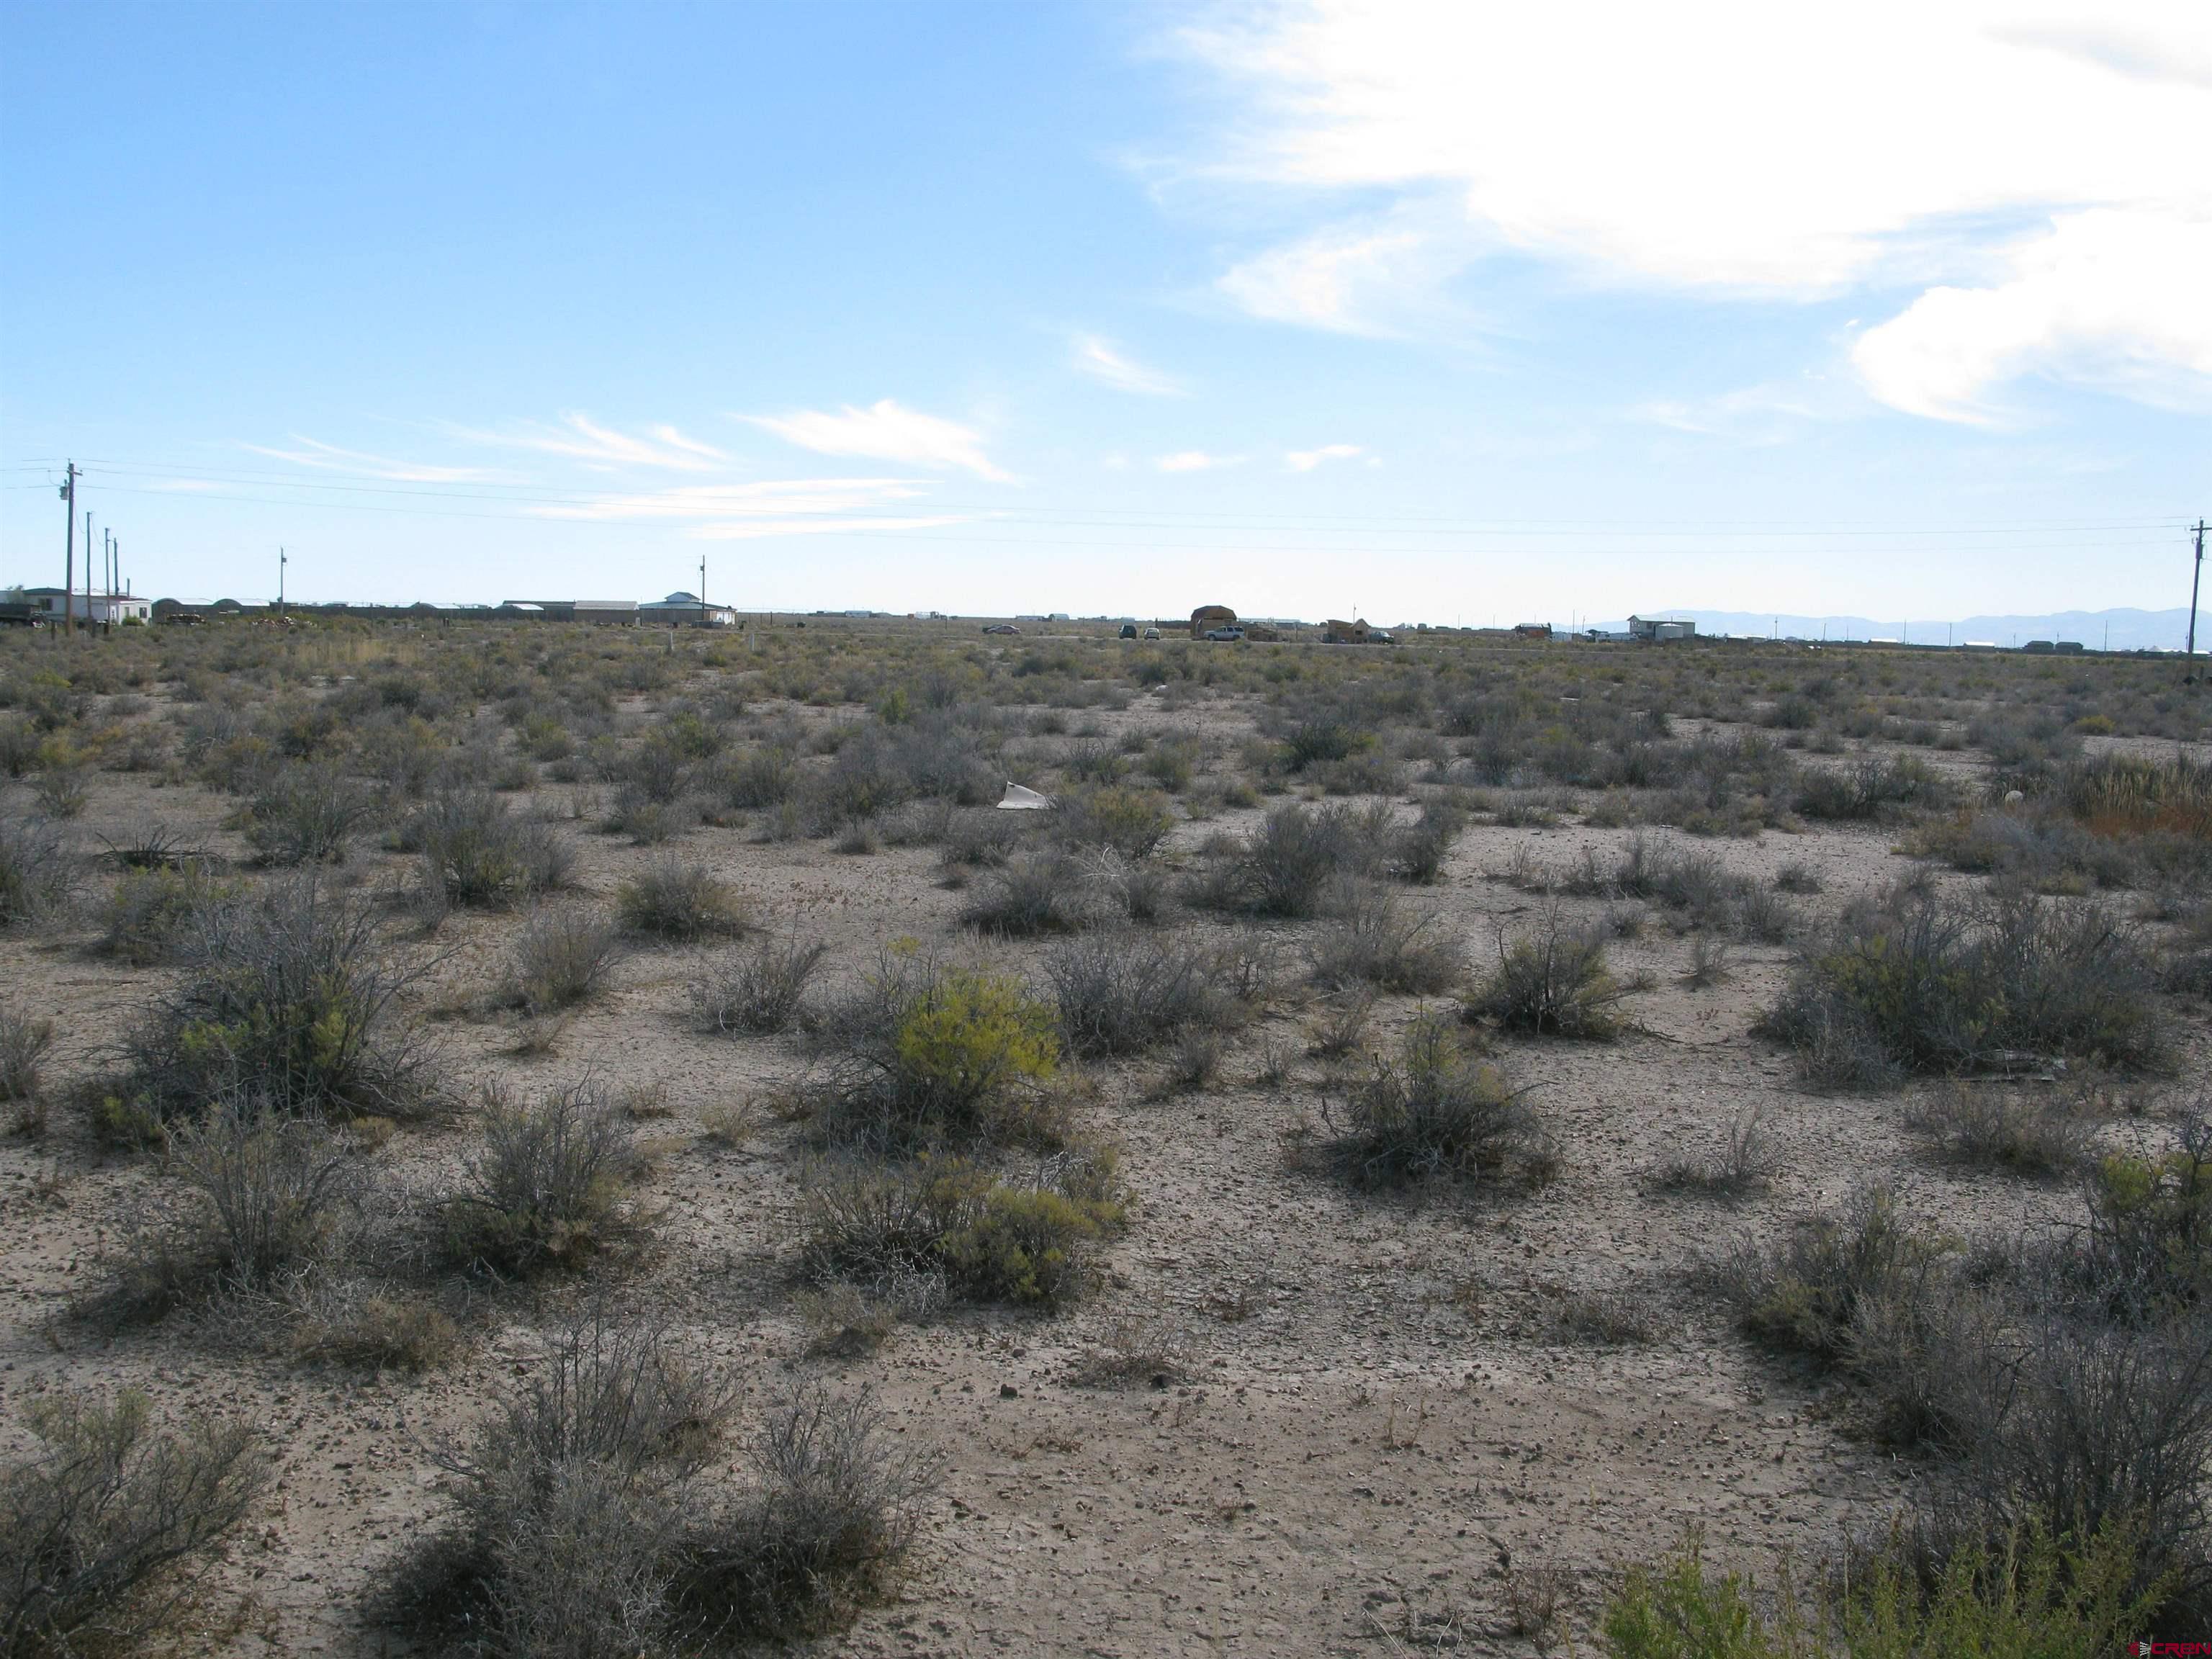 a view of a dry field